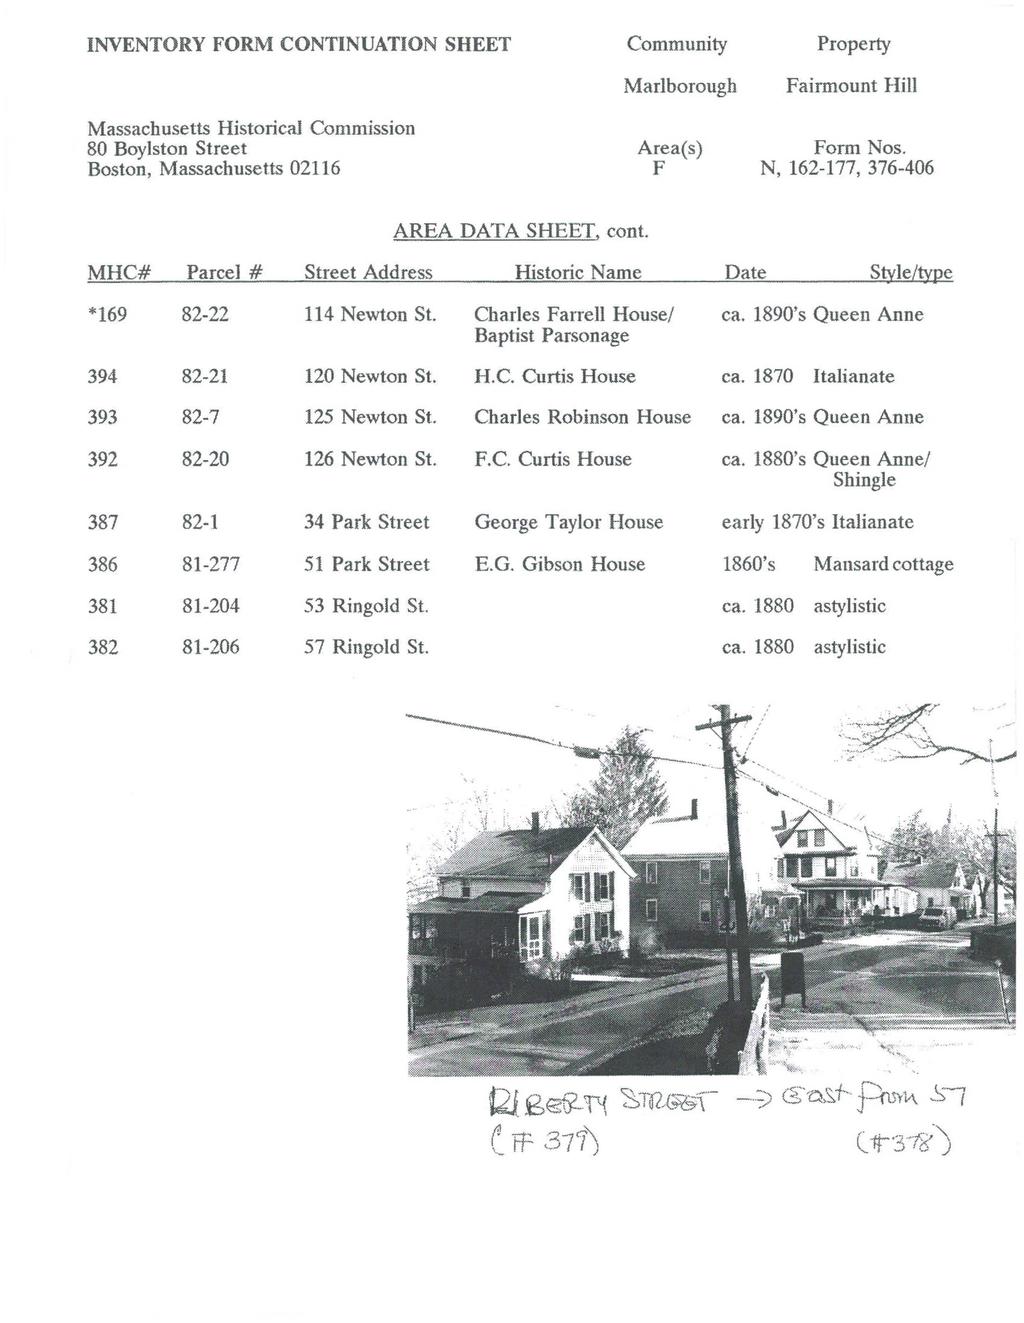 INVENTORY ORM CONTINUATION SHEET Community Marlborough Property airmount Hill orm Nos. N, 162-177, 376-406 AREA DATA SHEET, cont.